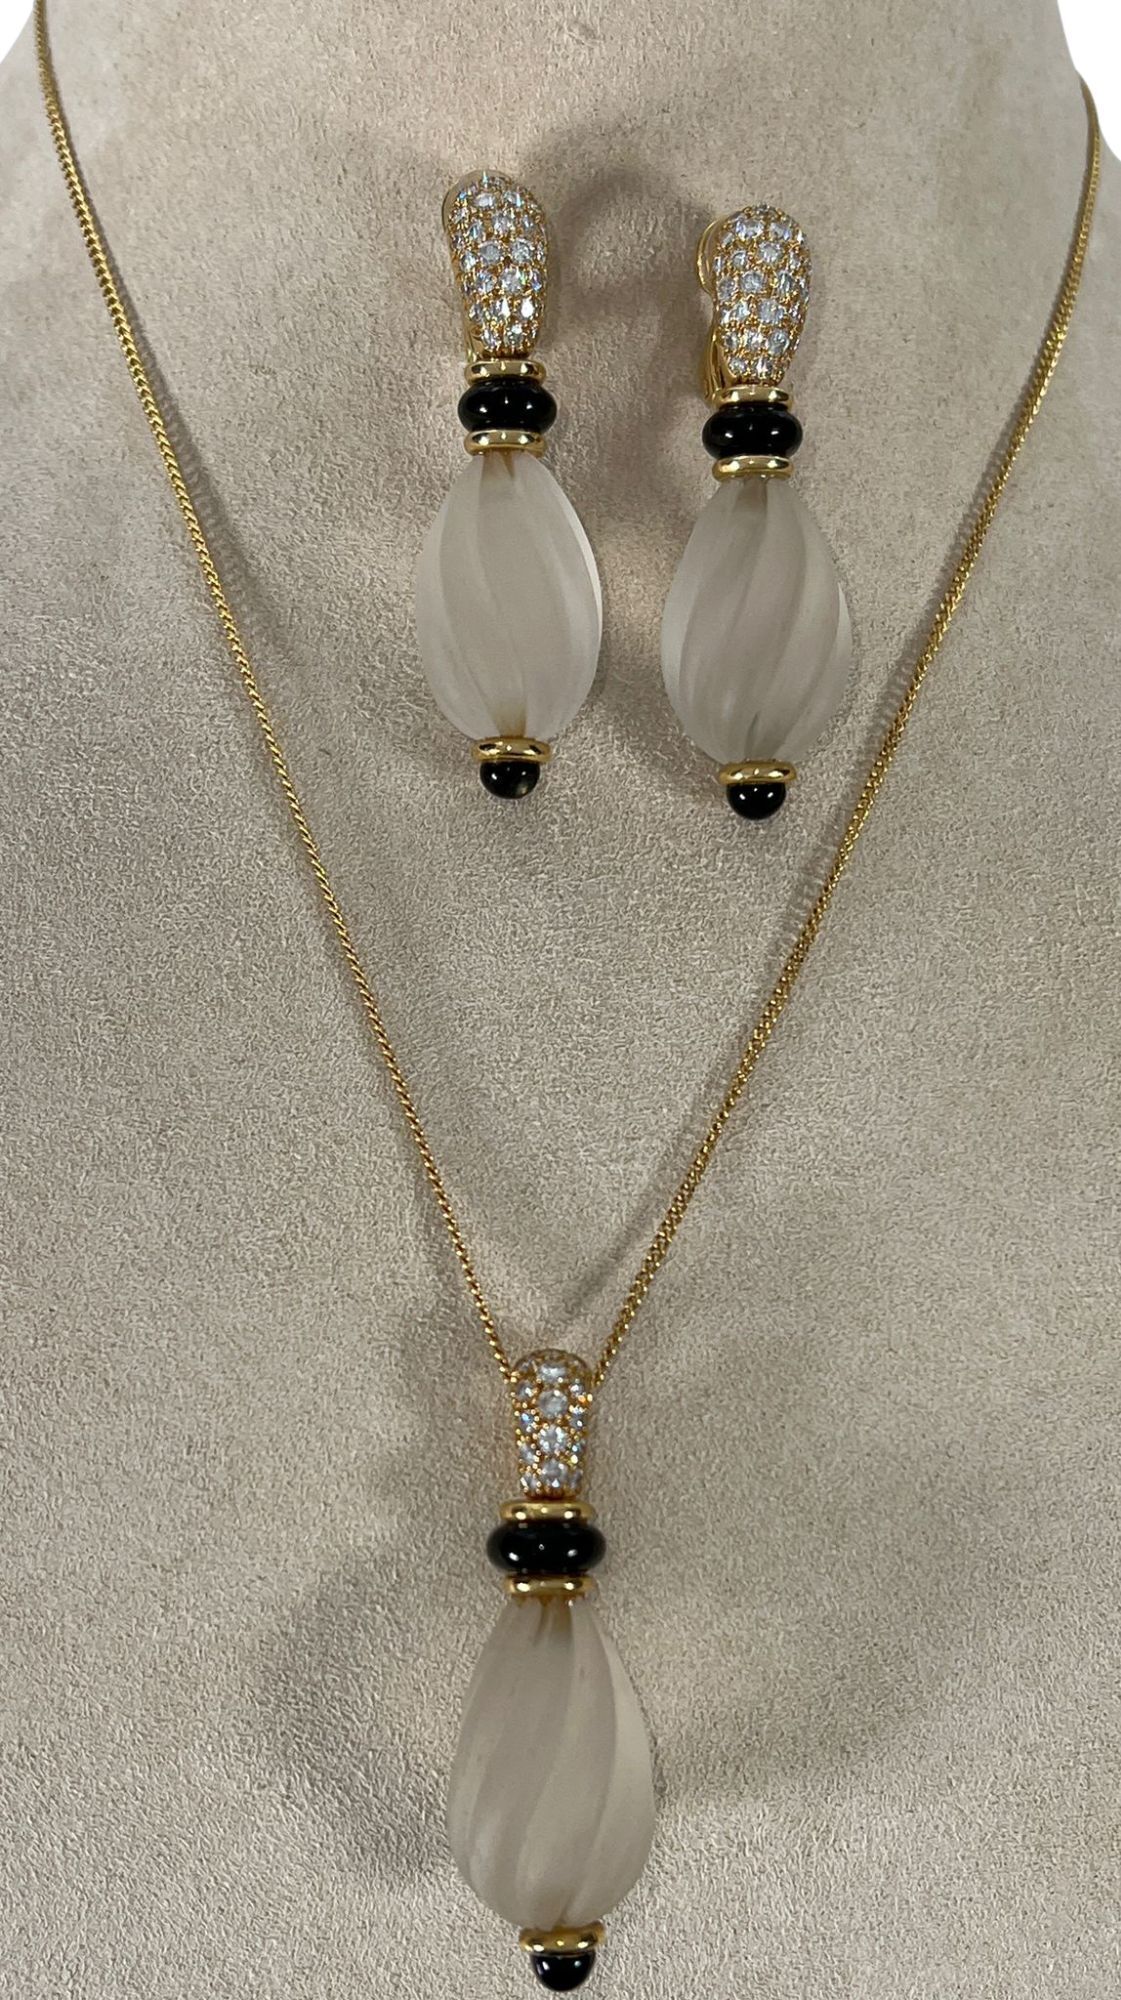 Givenchy 18K Gold Diamond Rock Crystal and Onyx Earrings and Pendant Suite